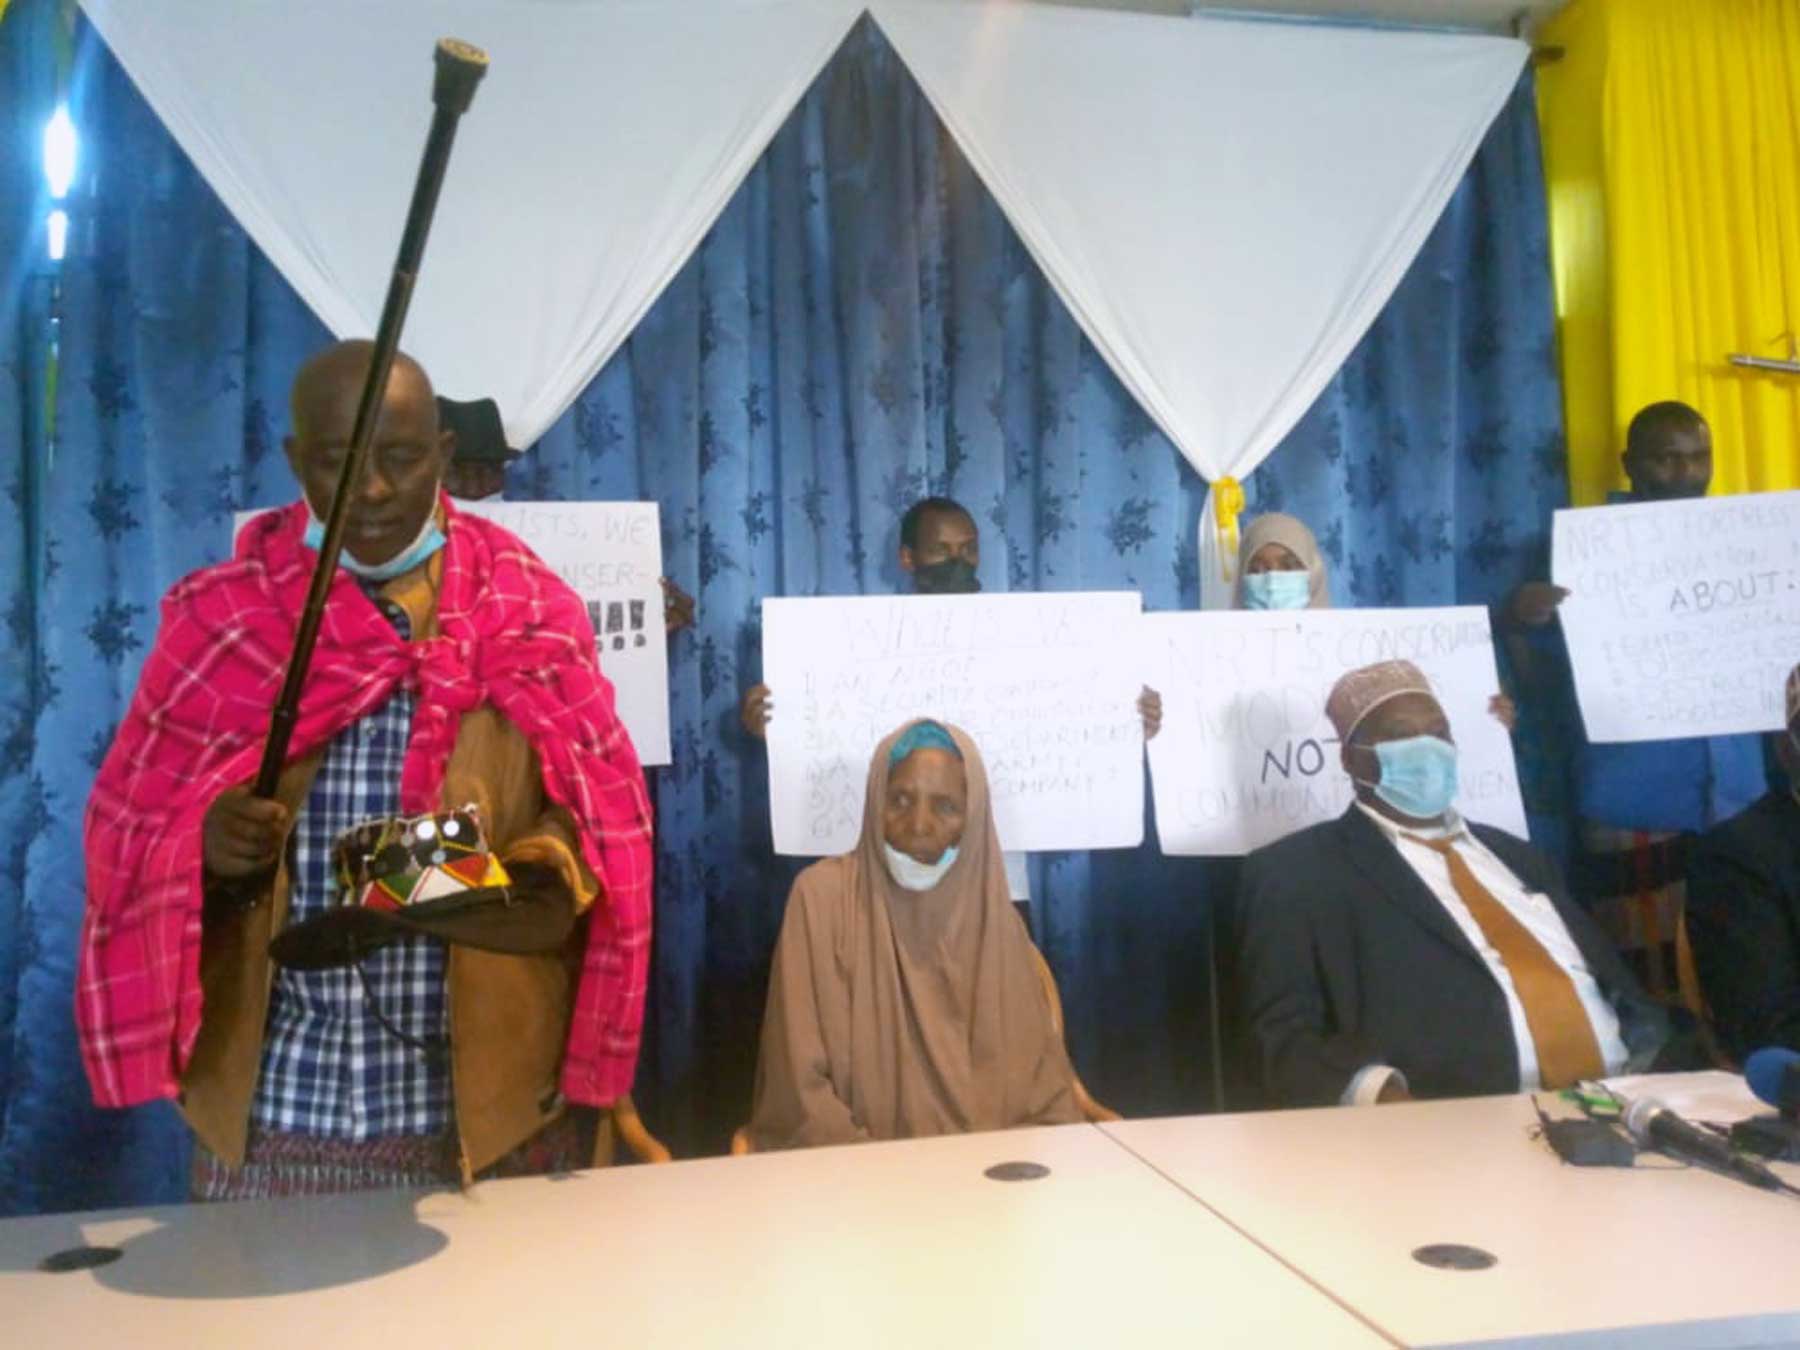 November 17, 2021 press conference held by pastoralists in Nairobi.